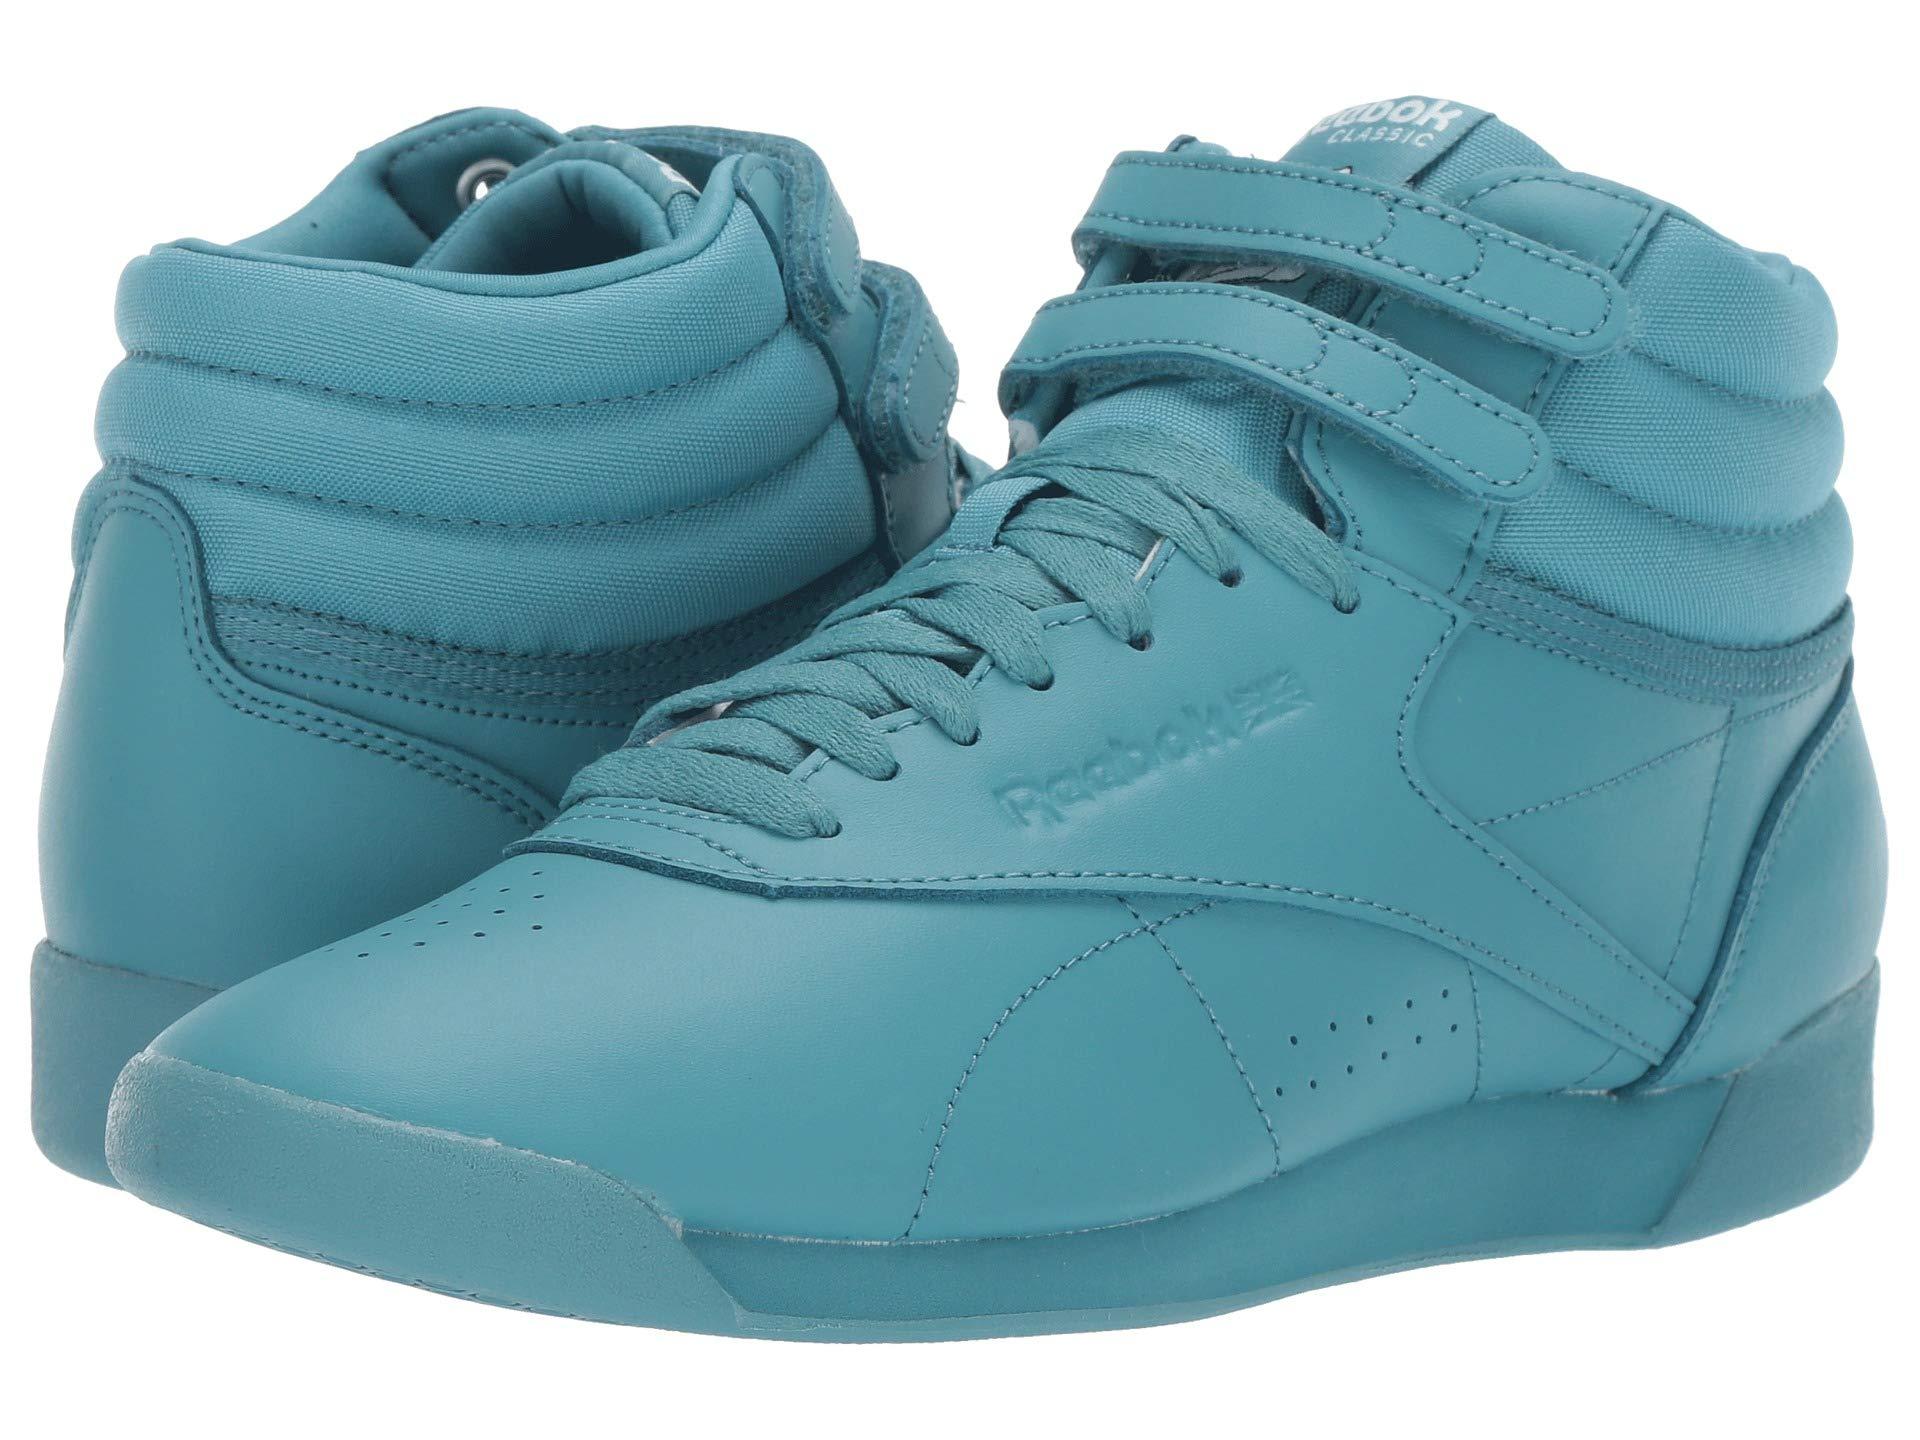 Lyst - Reebok Freestyle Hi (icons Mineral Mist/white) Women's Classic ...